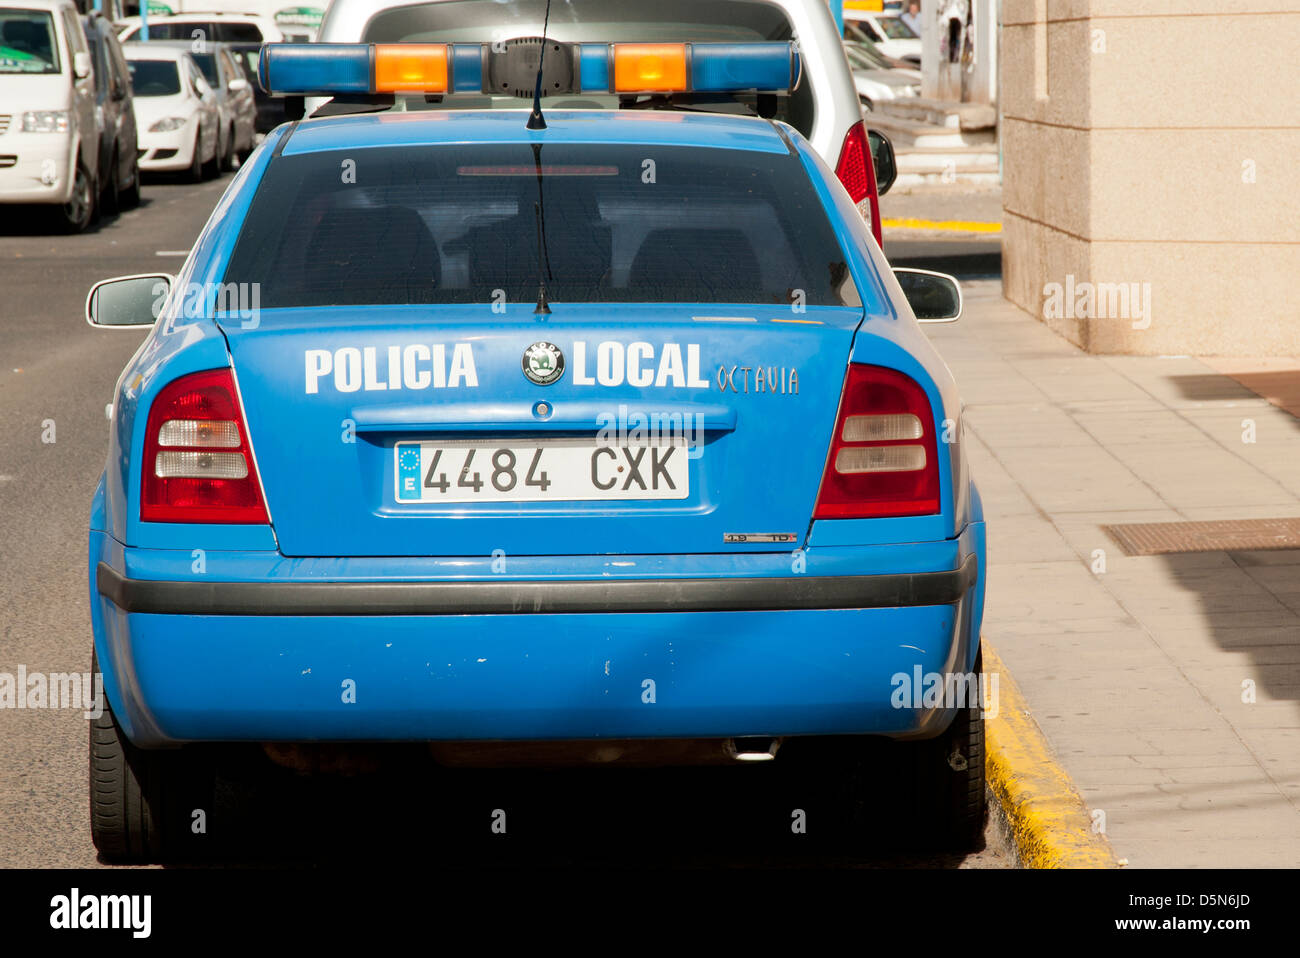 Policia local car in the canary islands, local police. Stock Photo